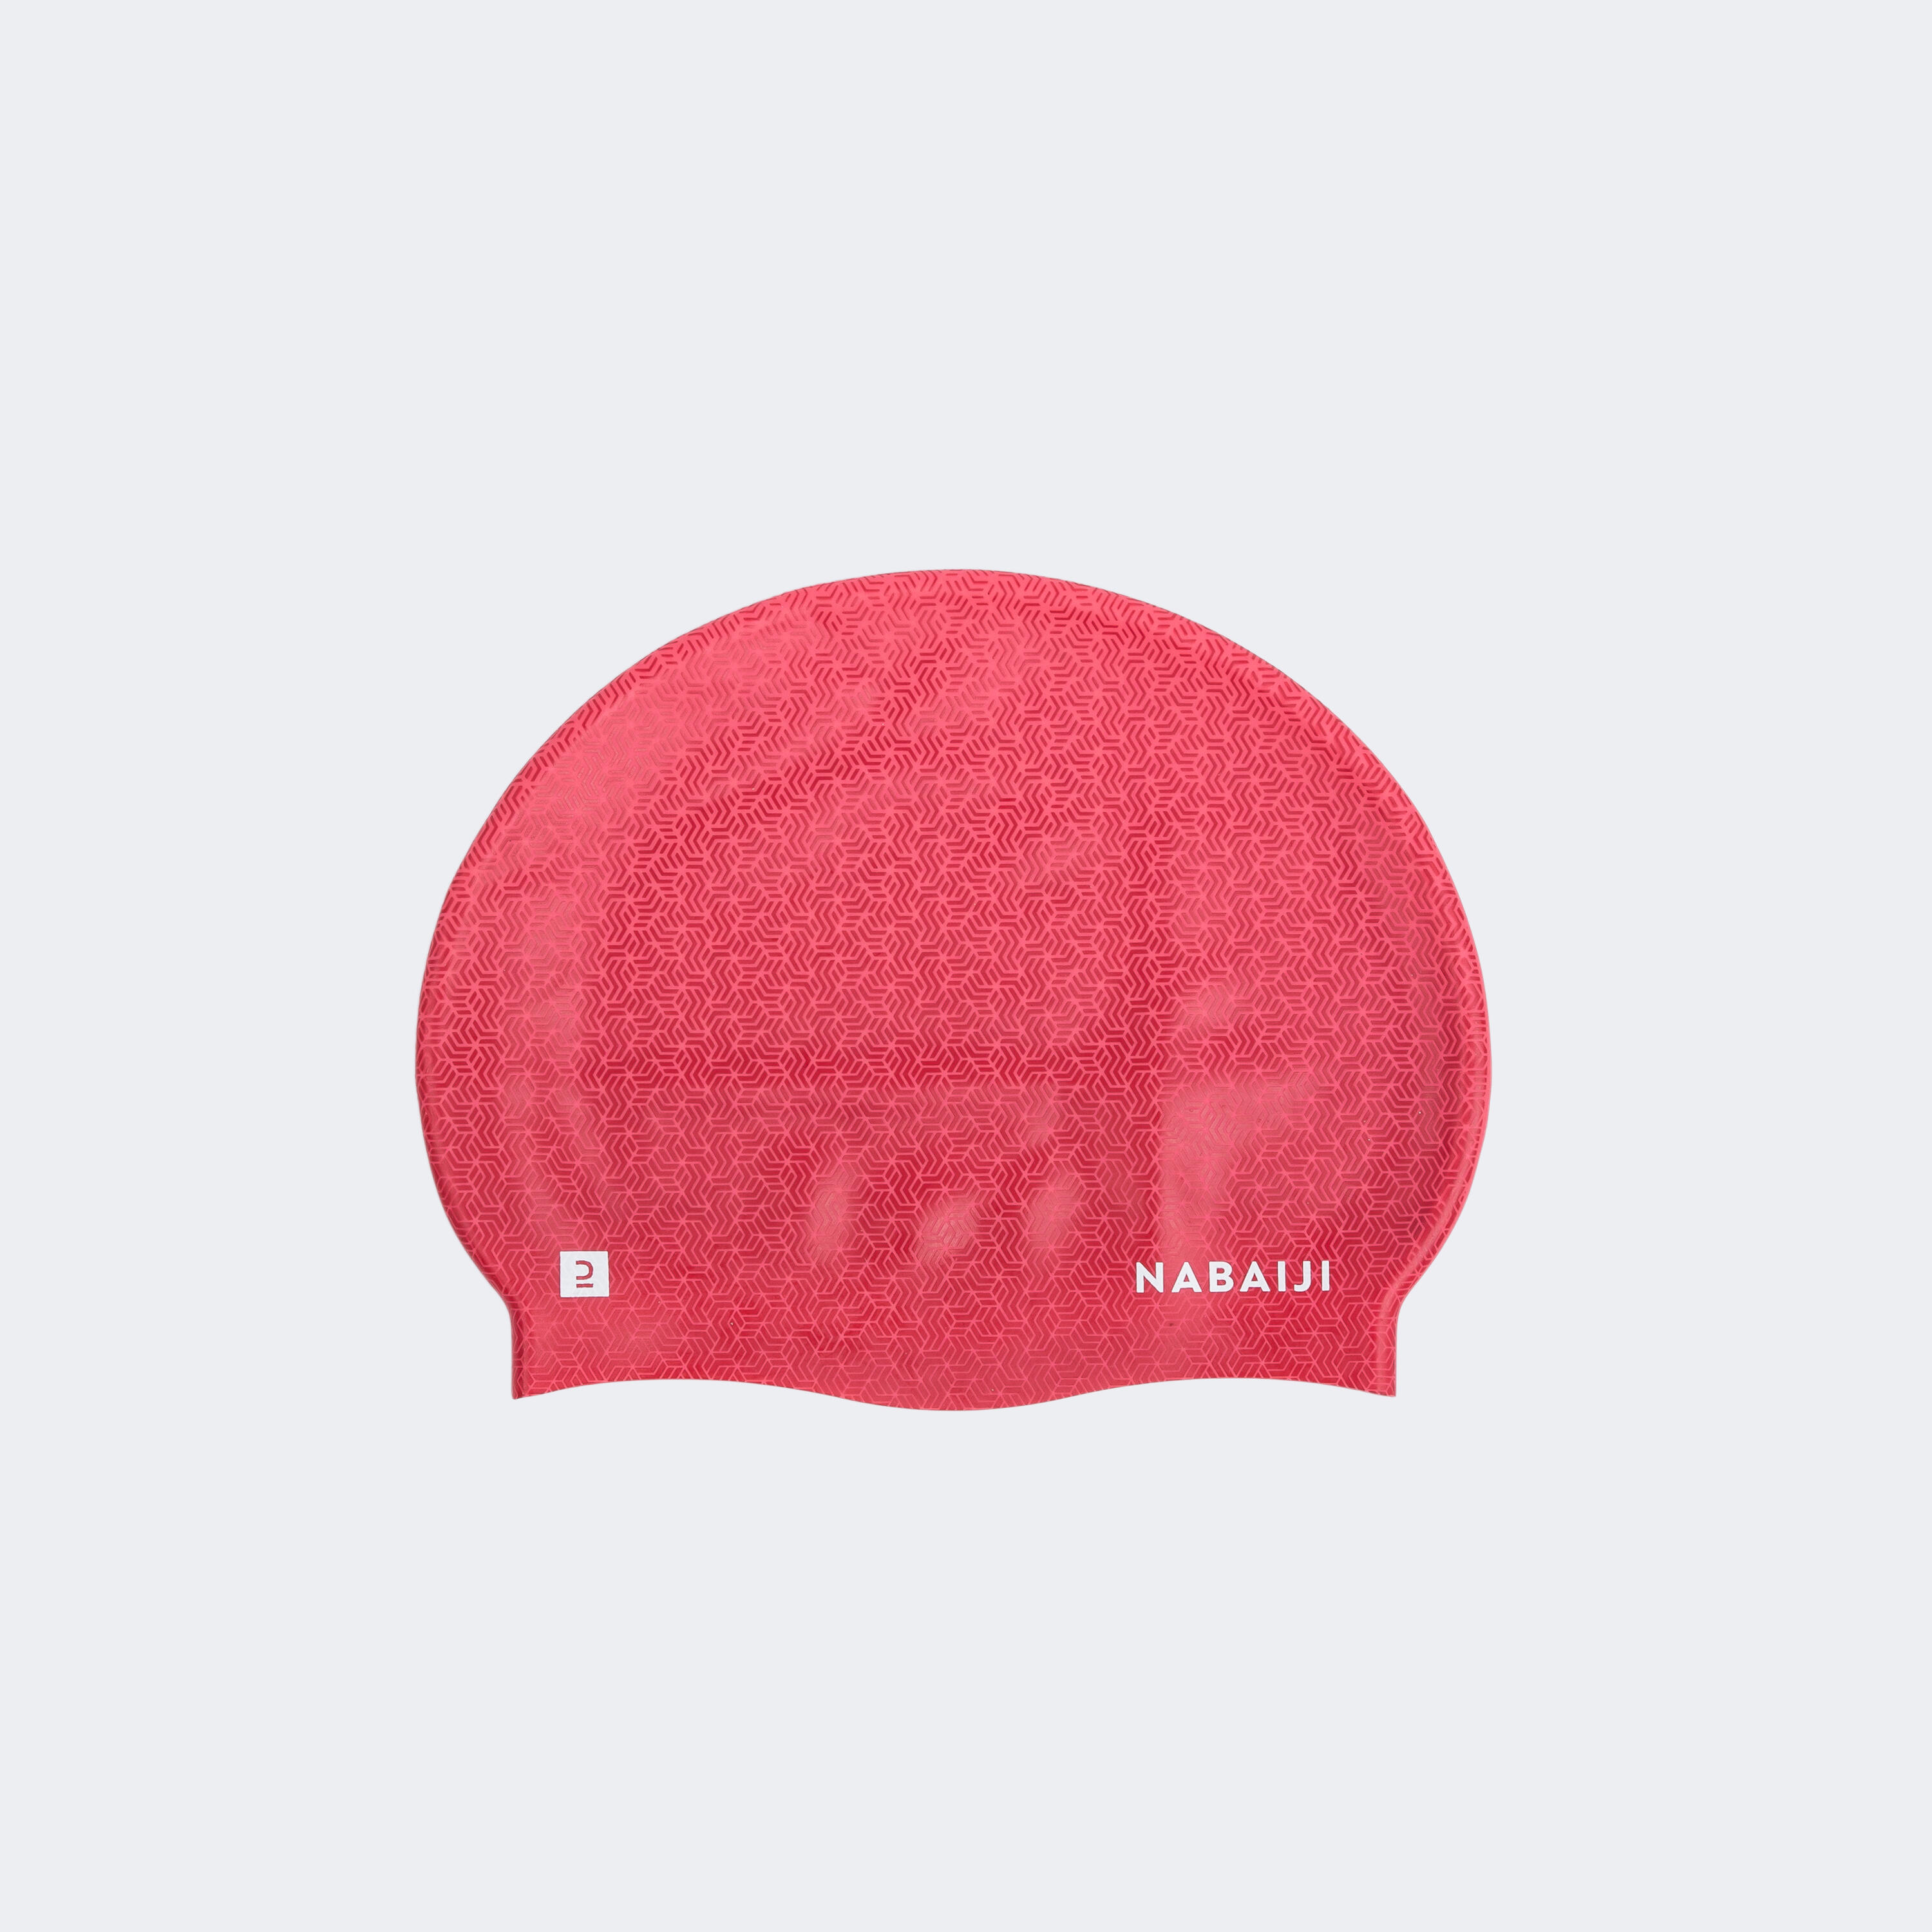 SILICONE swim cap - One size - Geo red pink 1/2